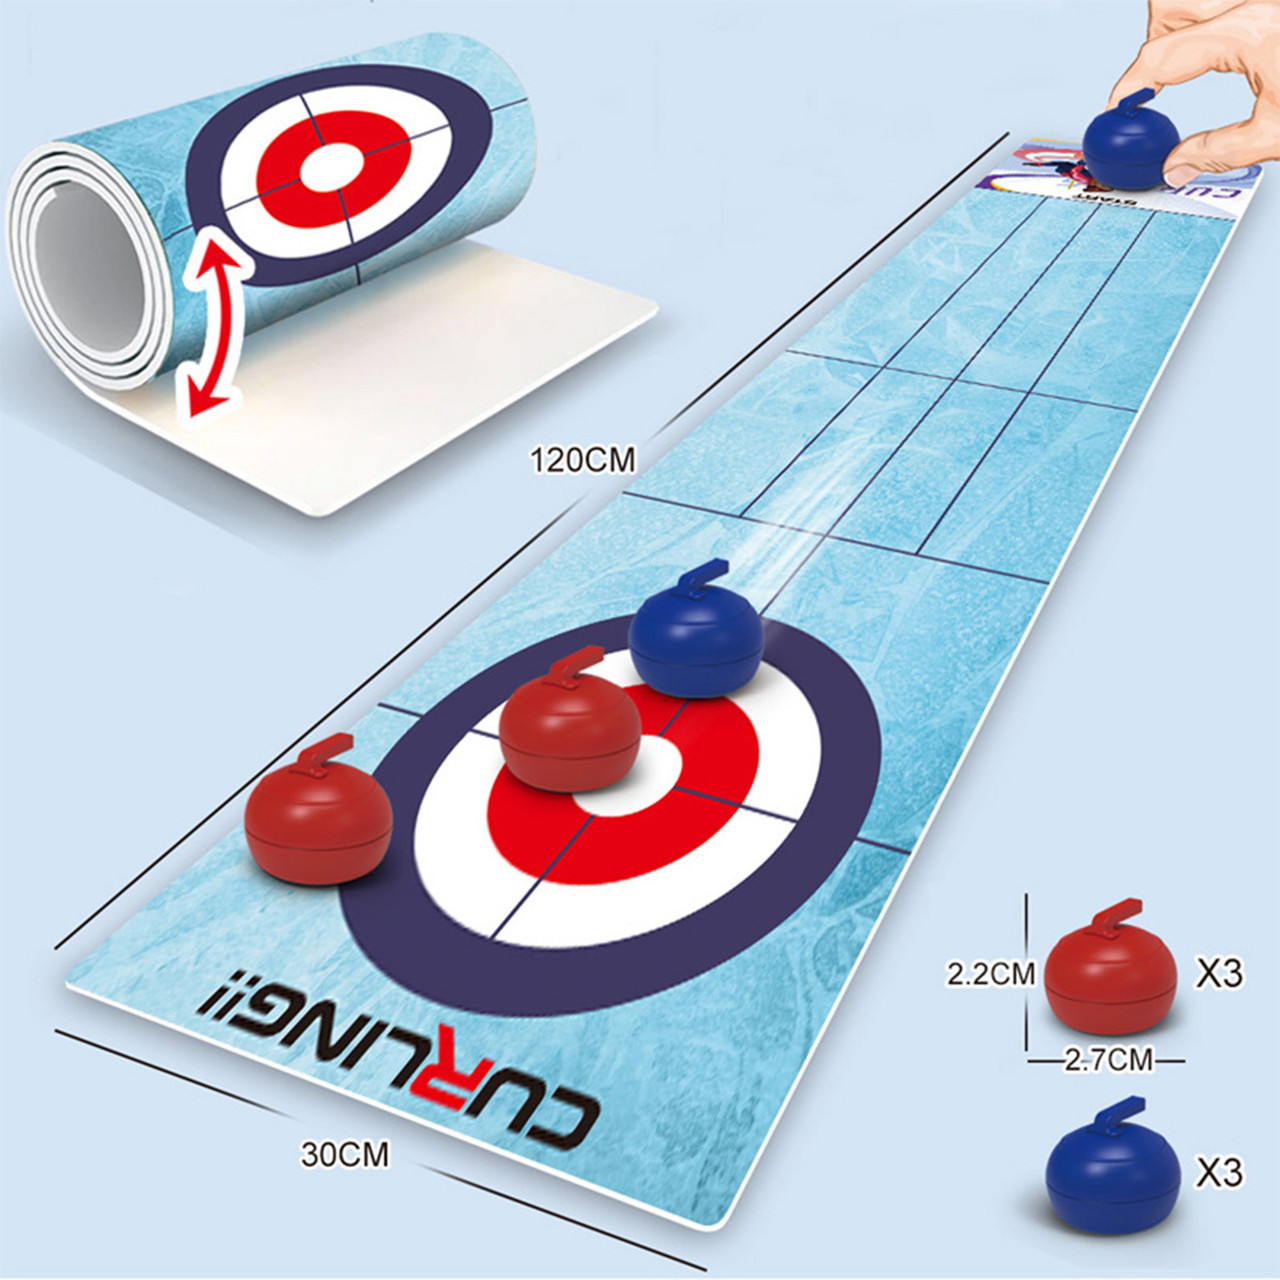 Tabletop Roll-up Sports Games - Basketball, Curling, Bowling, Football, Golf product image